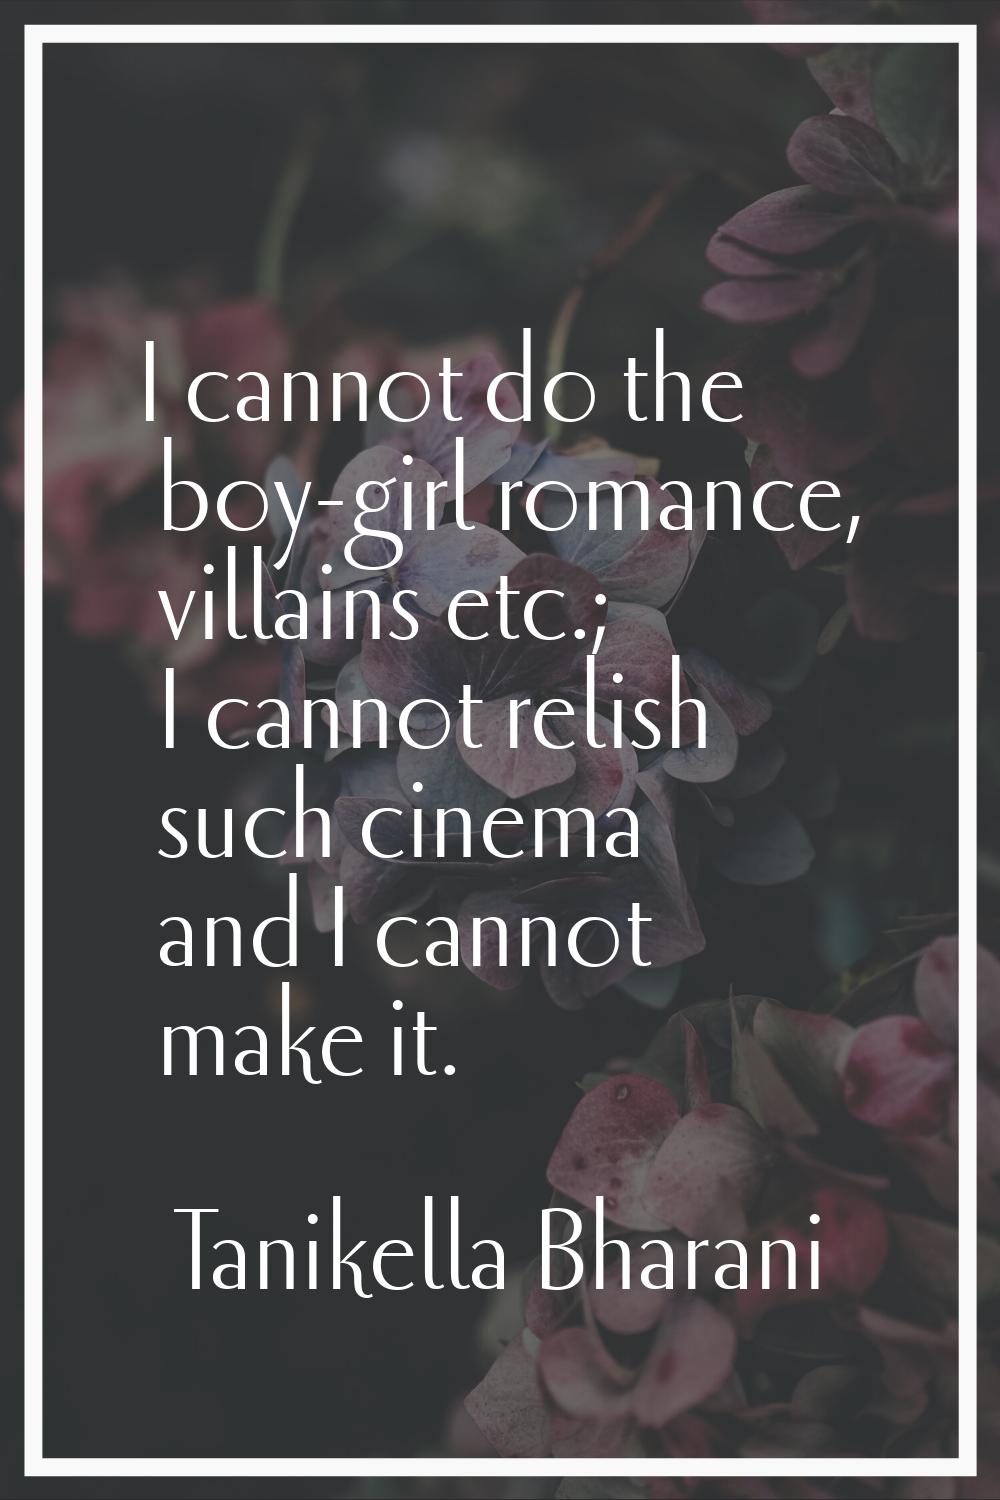 I cannot do the boy-girl romance, villains etc.; I cannot relish such cinema and I cannot make it.